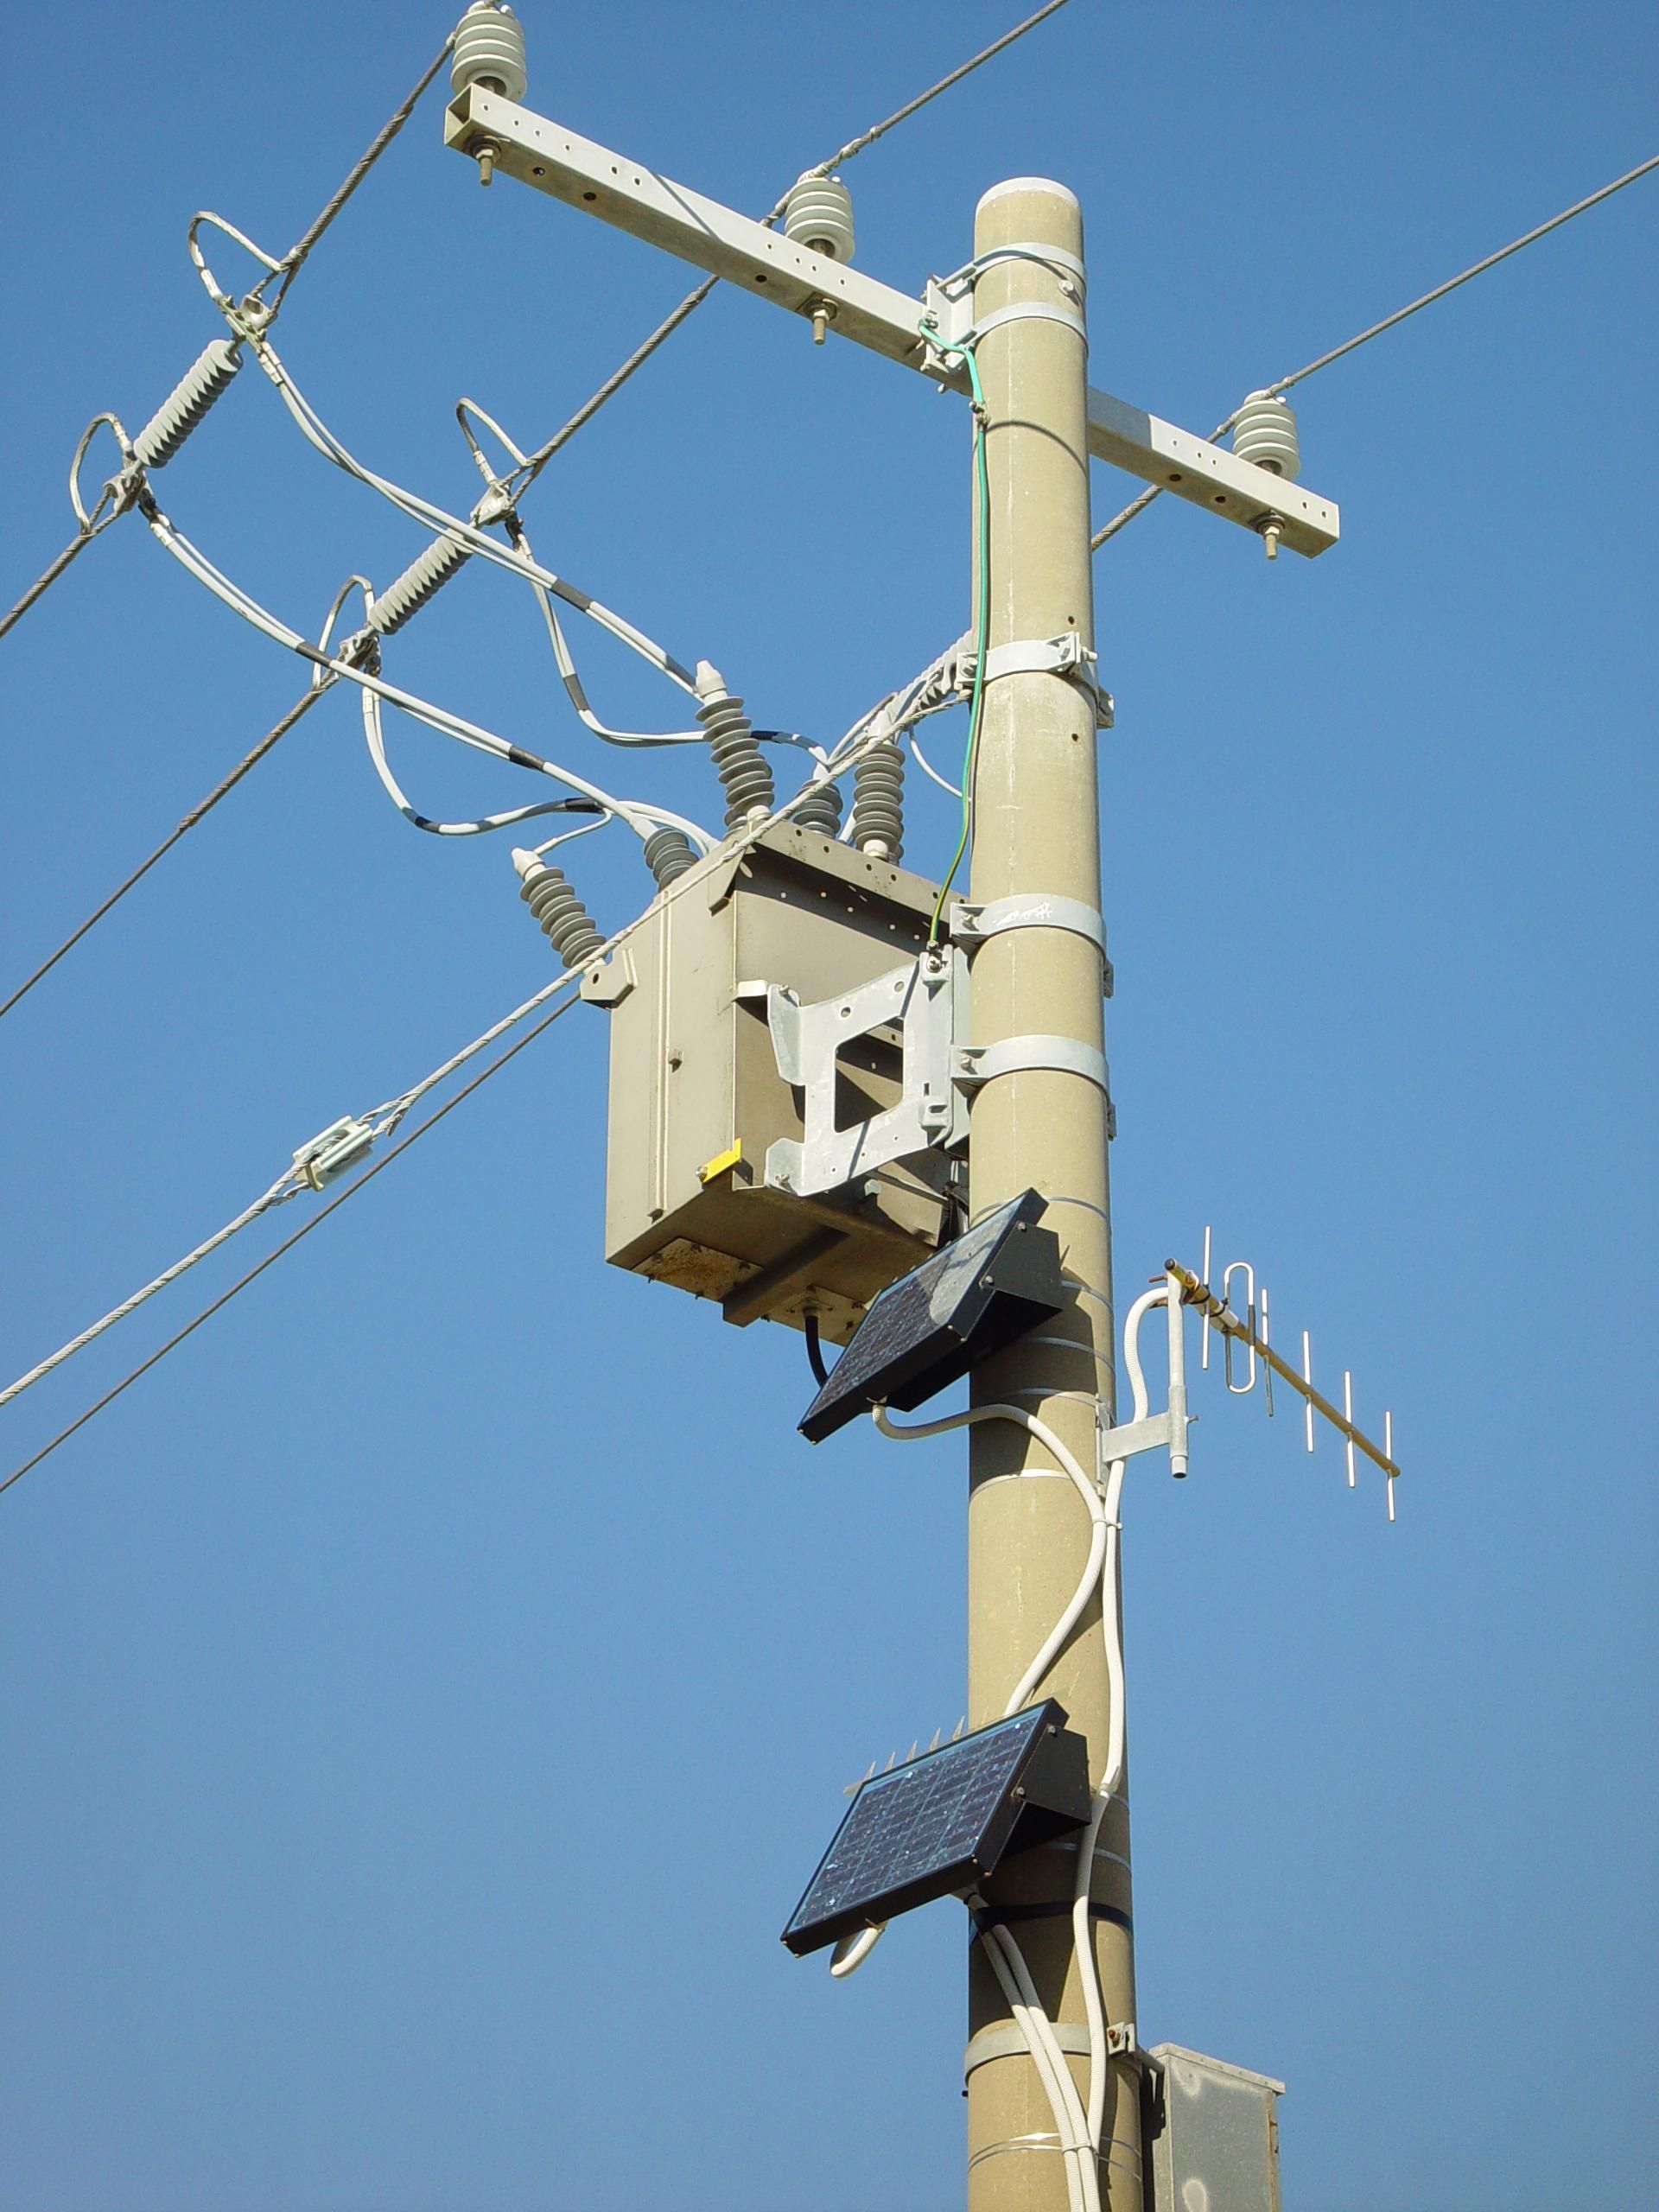 Busy power pole with solar panels